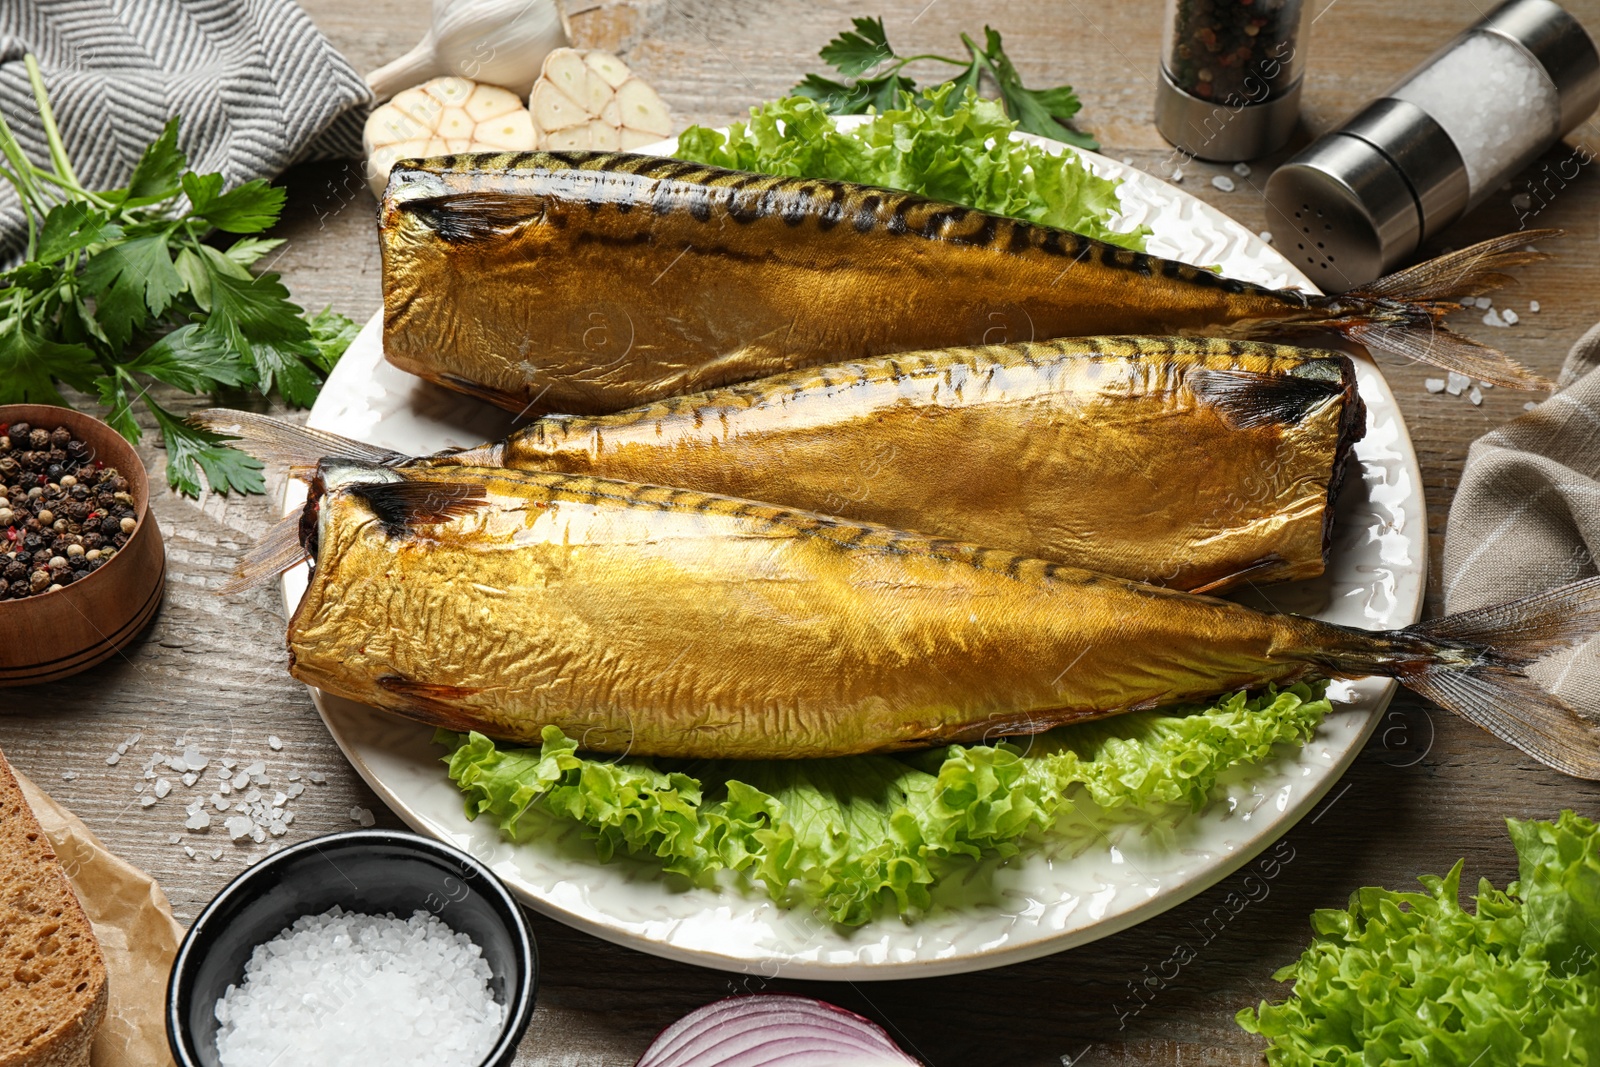 Photo of Tasty smoked fish served on wooden table